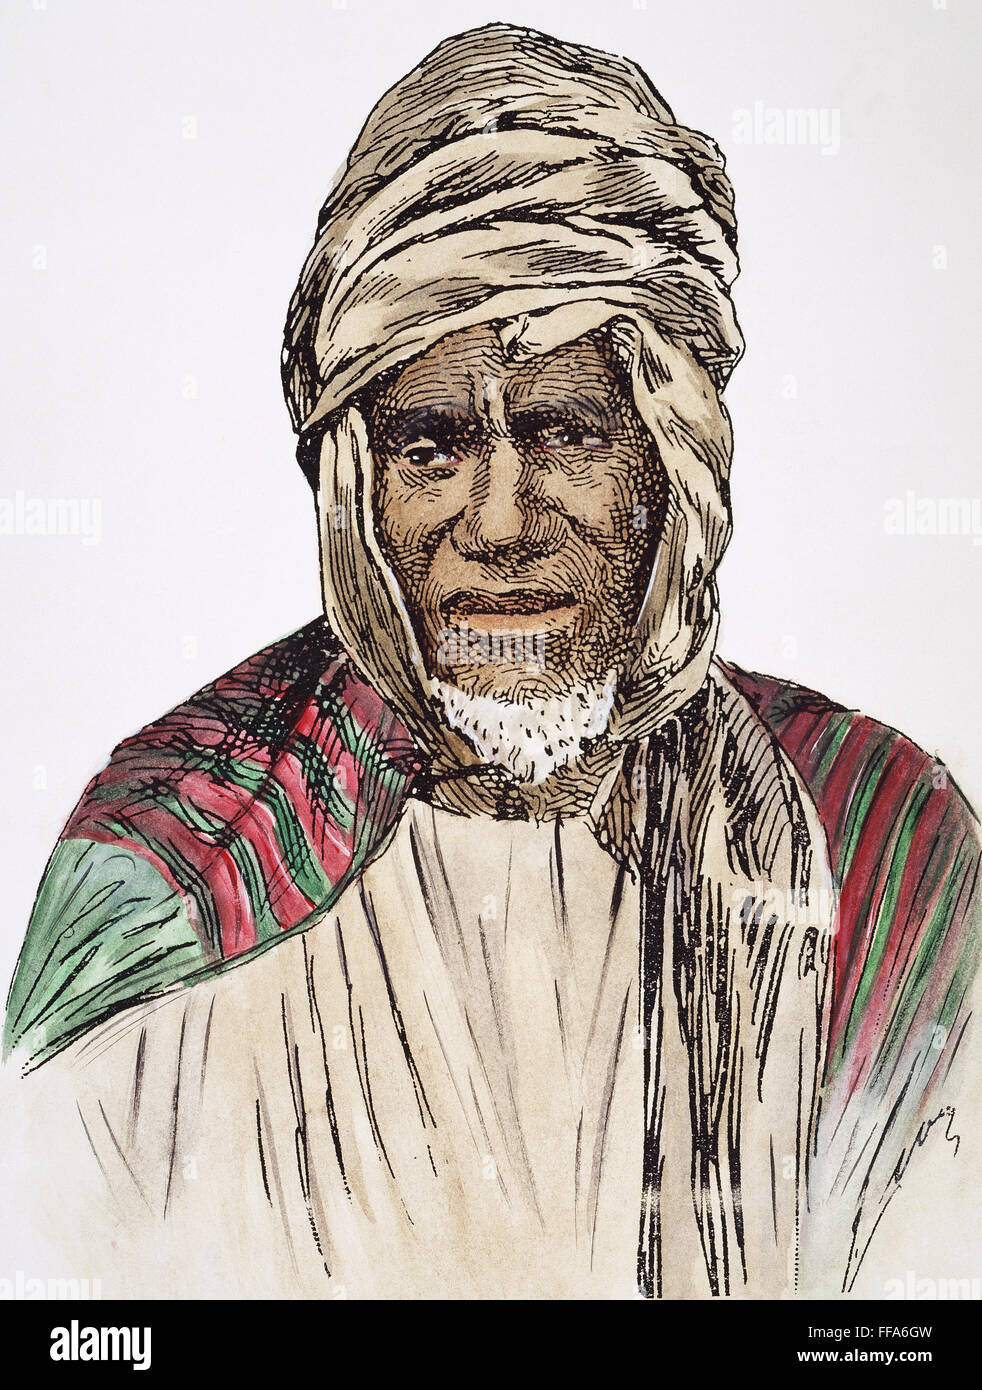 SAMORY TOUR╔ (c1830-1900). /nWest African ruler. Pen-and-ink drawing, French. Stock Photo